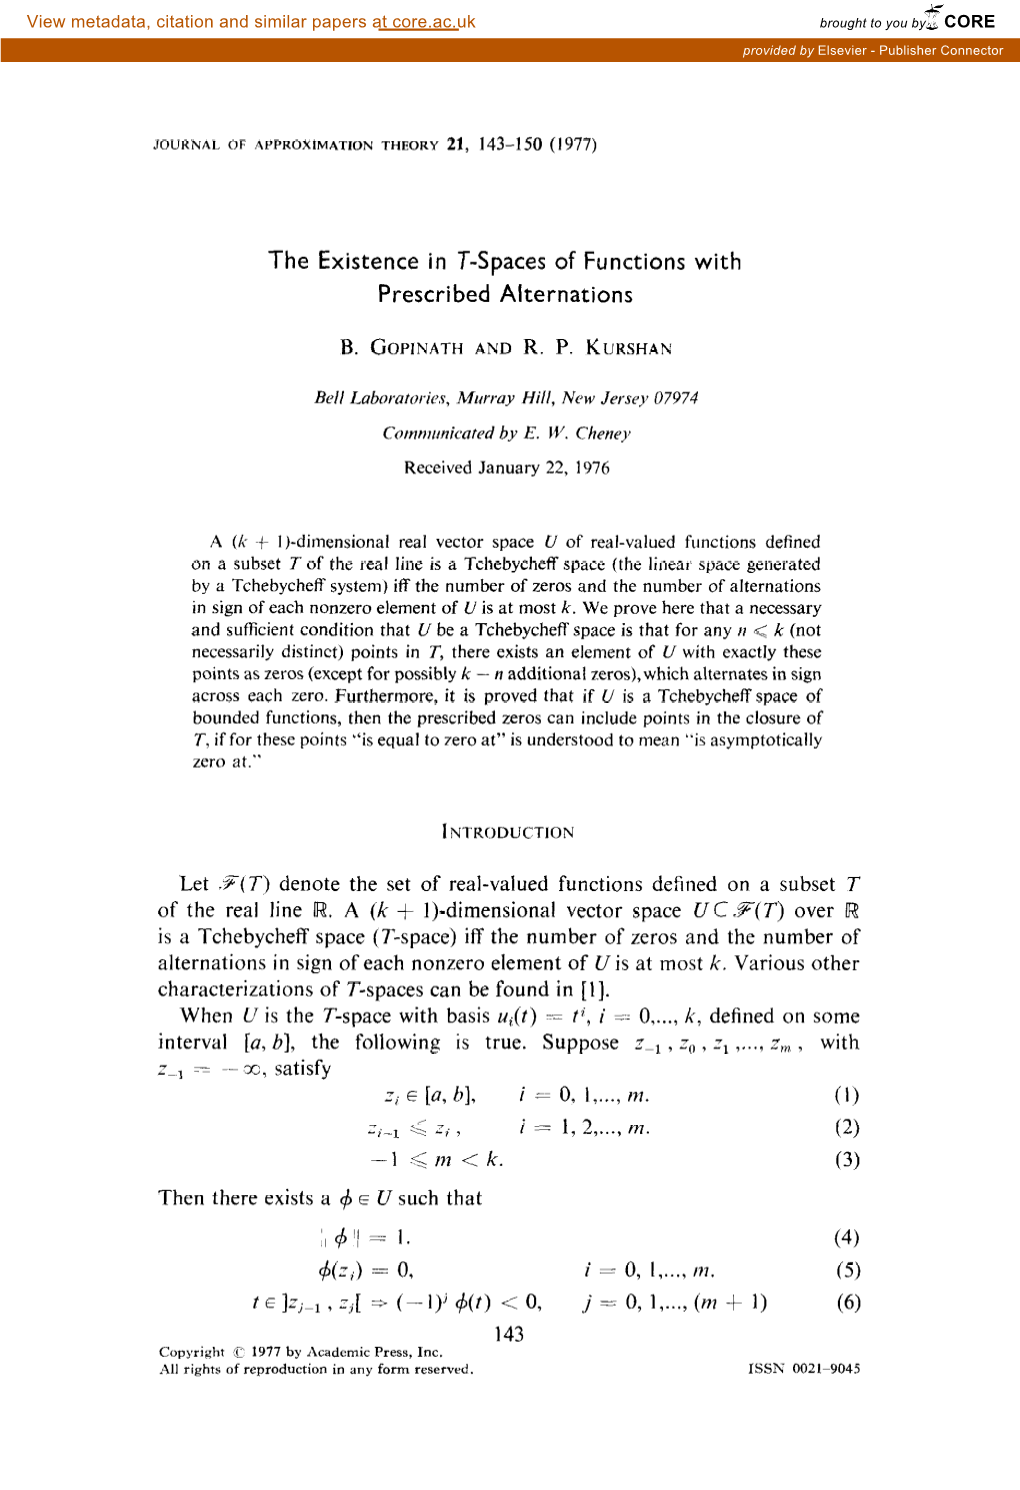 The Existence in T-Spaces of Functions with Prescribed Alternations